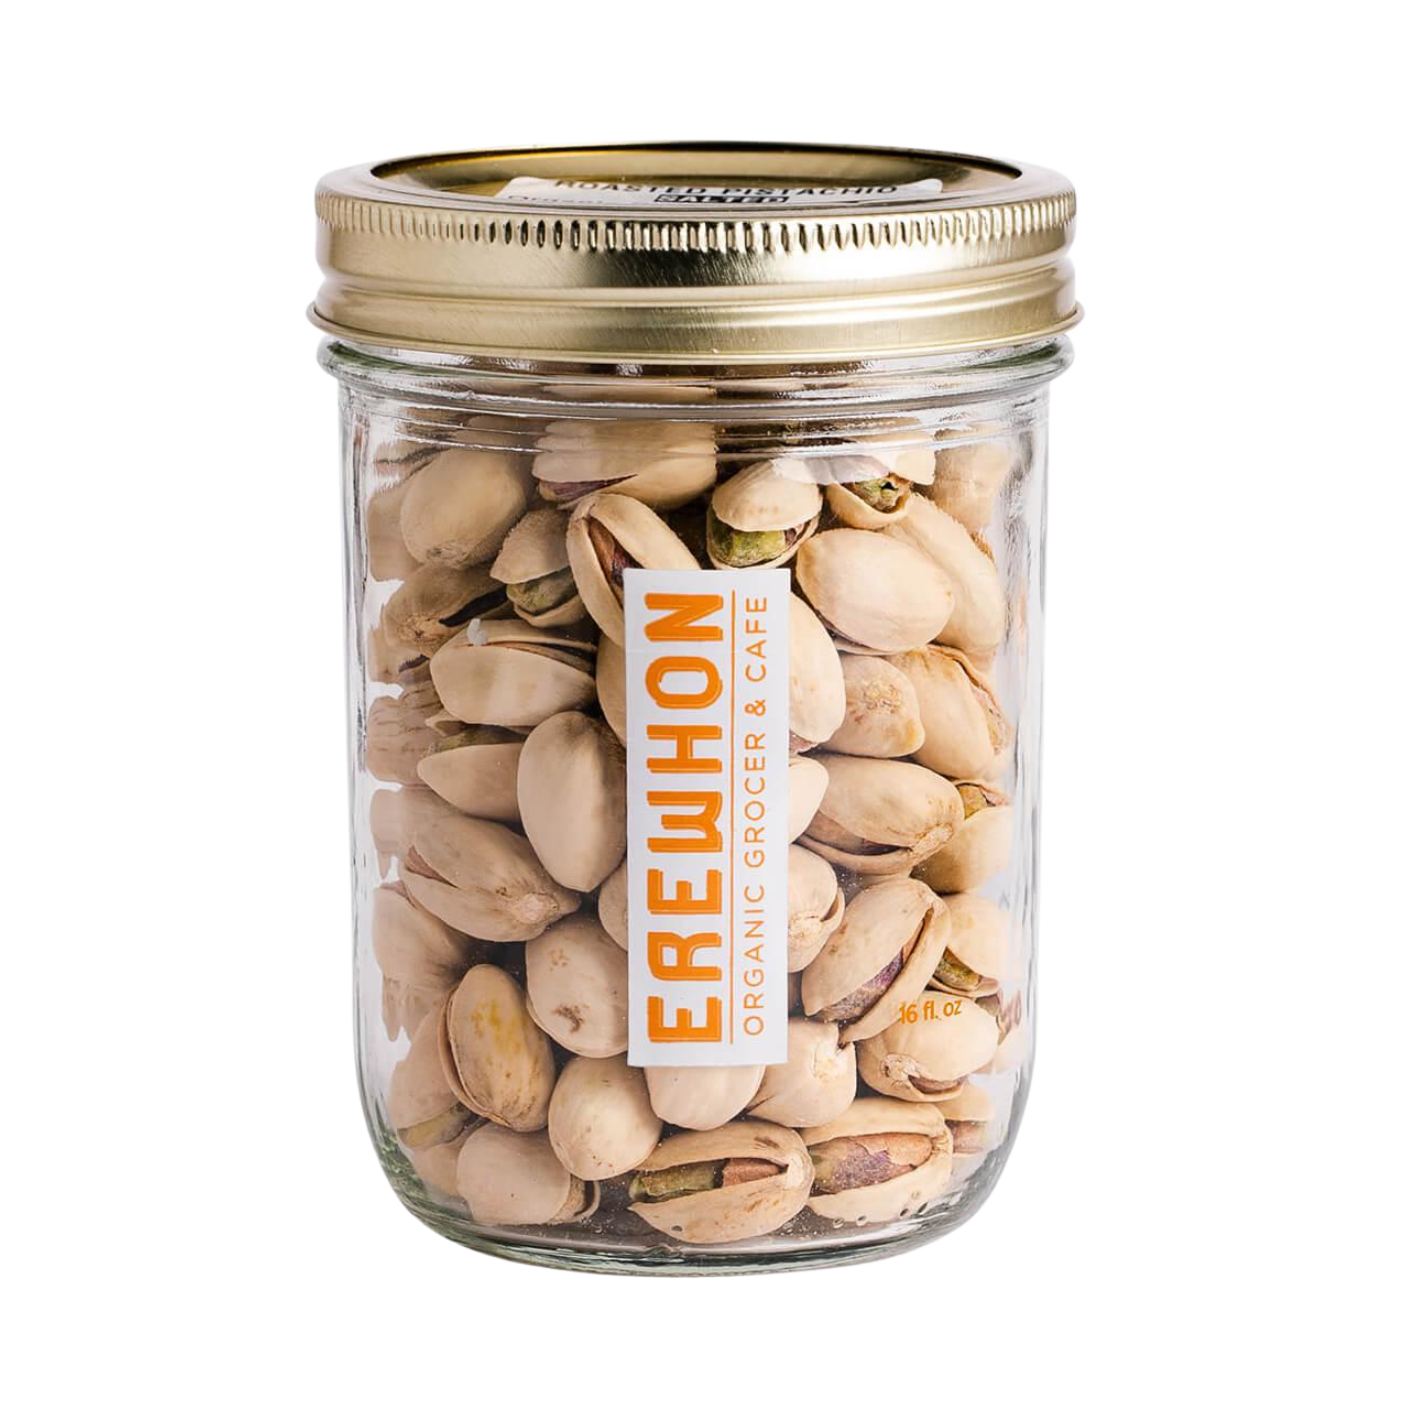 Erewhon -Organic Roasted & Salted Pistachios